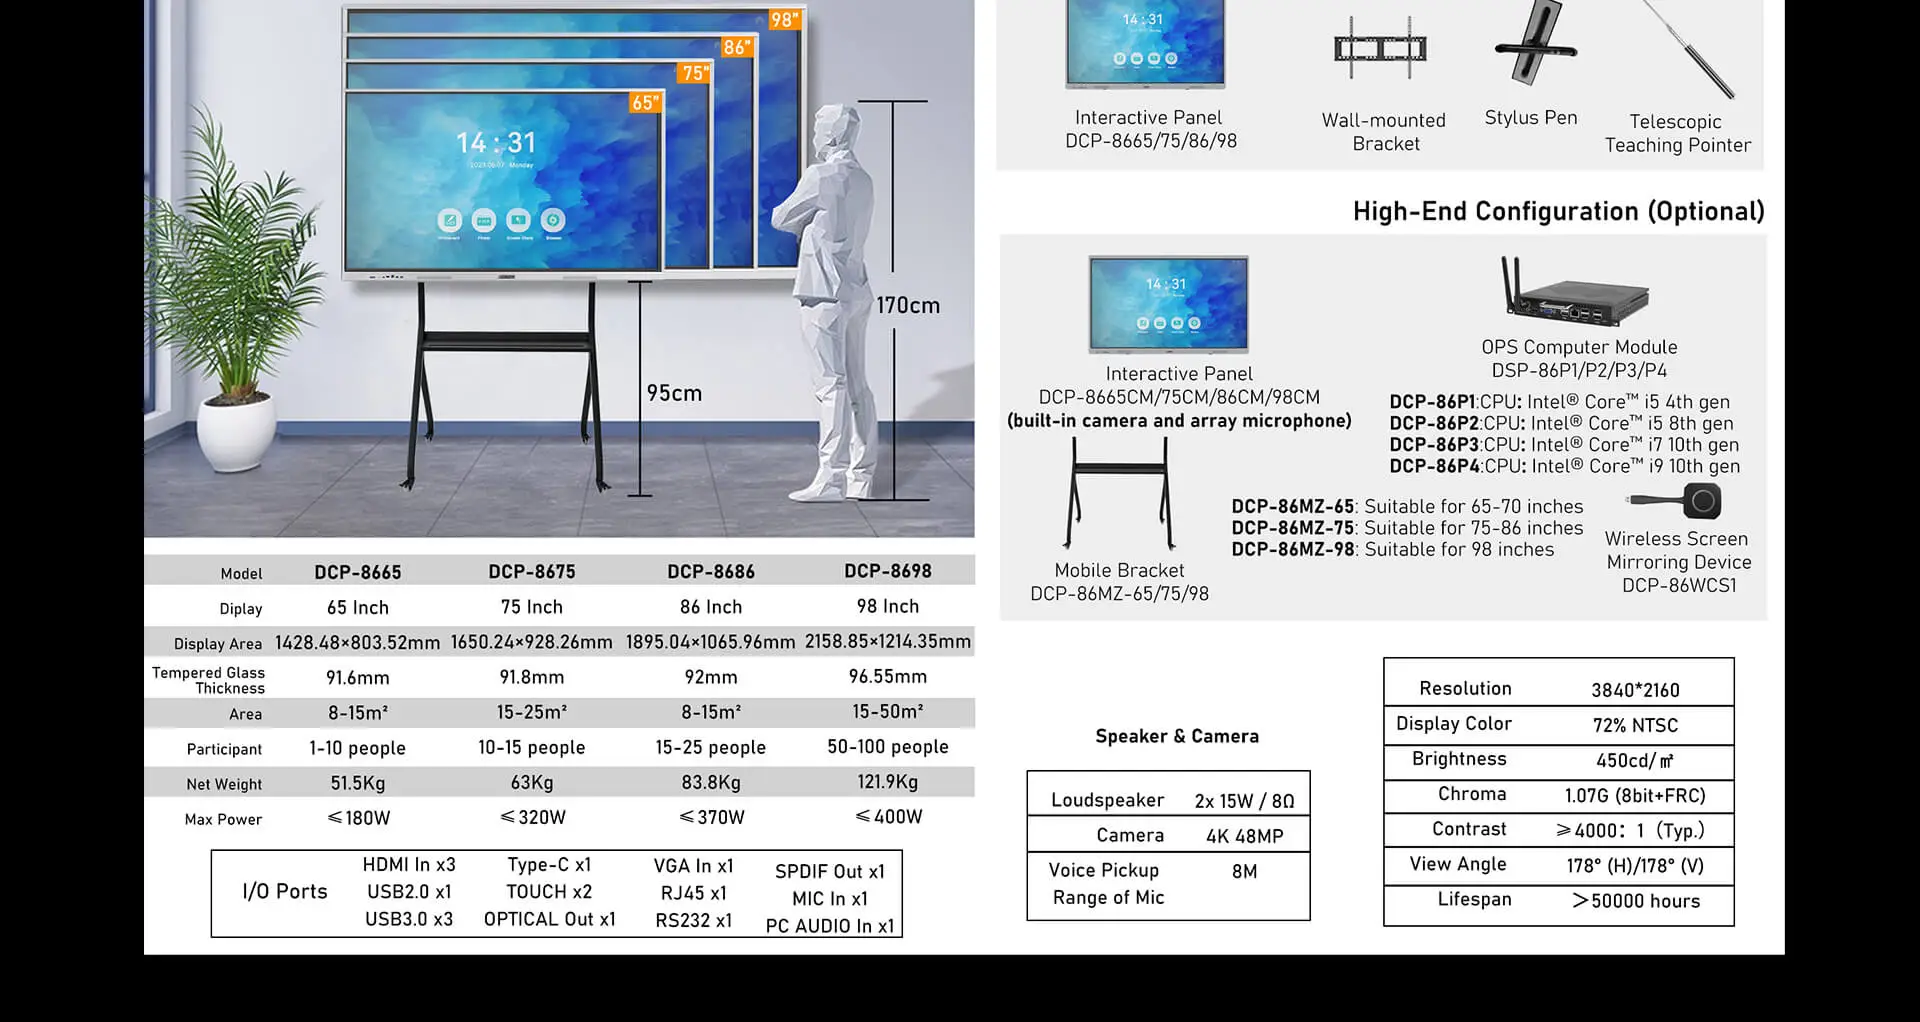 Interactive Flat Panel 98 inch with Array Speaker & Camera